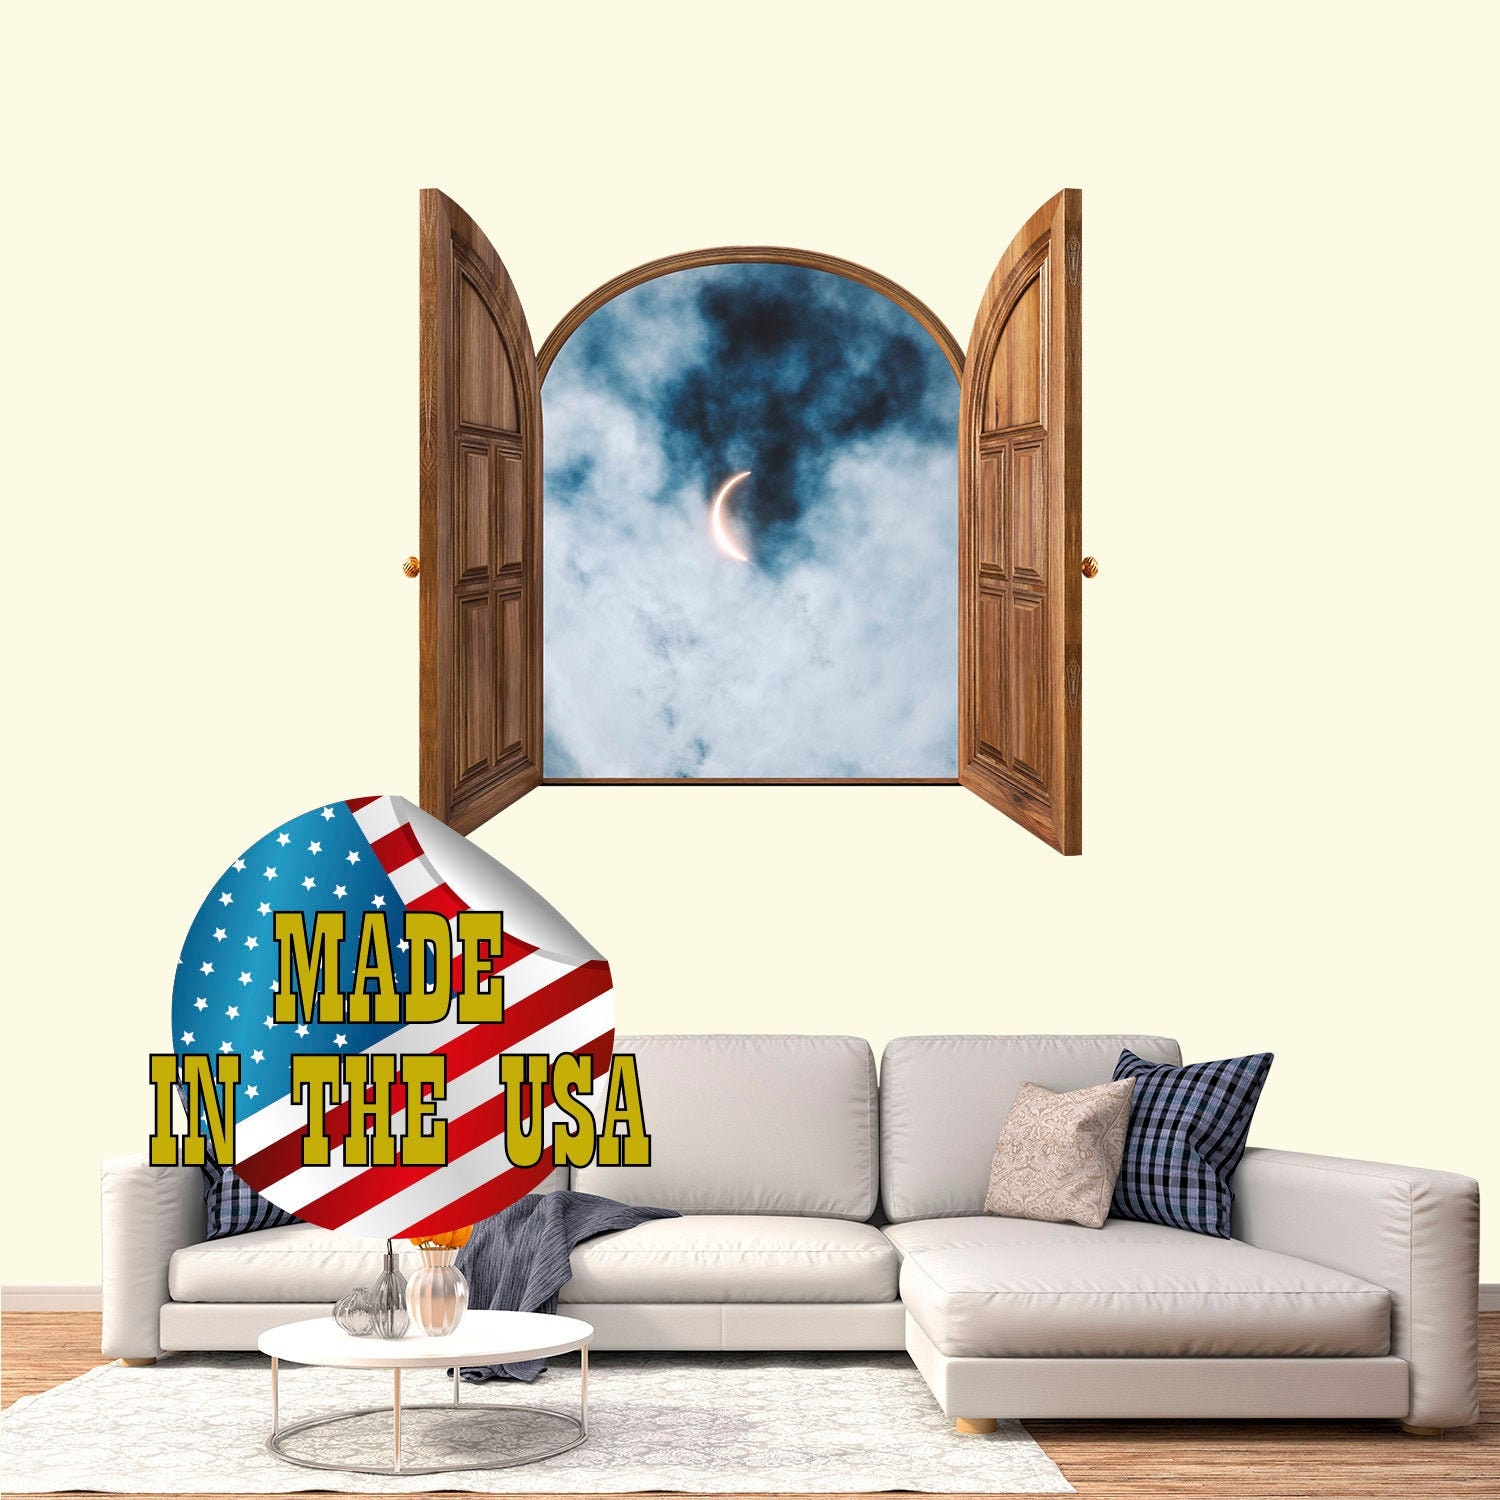 3D Dinosaurs Art Wall Sticker Vinyl Decor With Broken Illusion Effect  Peel-and-stick Dino Porthole Cracked Mural for DIY Enthusiasts 